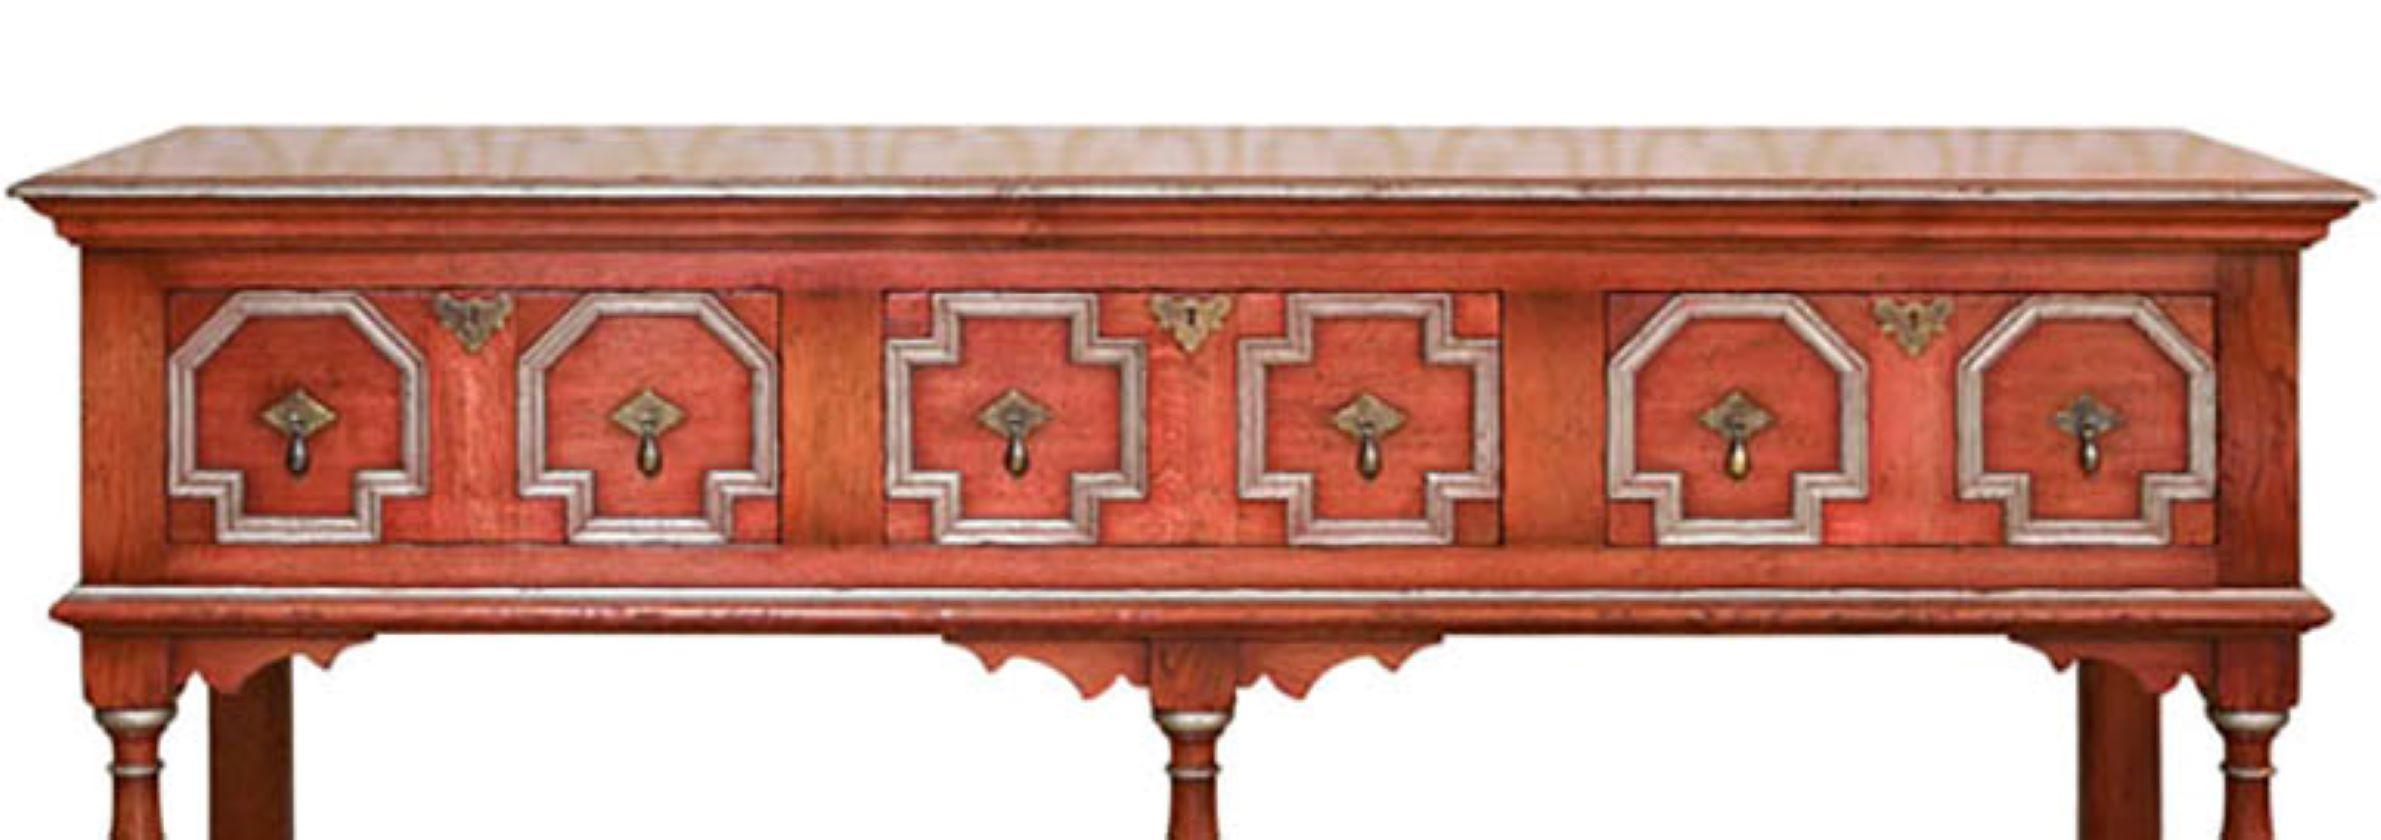 Jacobean Oak Salmon Red/Silver Sideboard Dresser Base In New Condition For Sale In Cranbrook, Kent